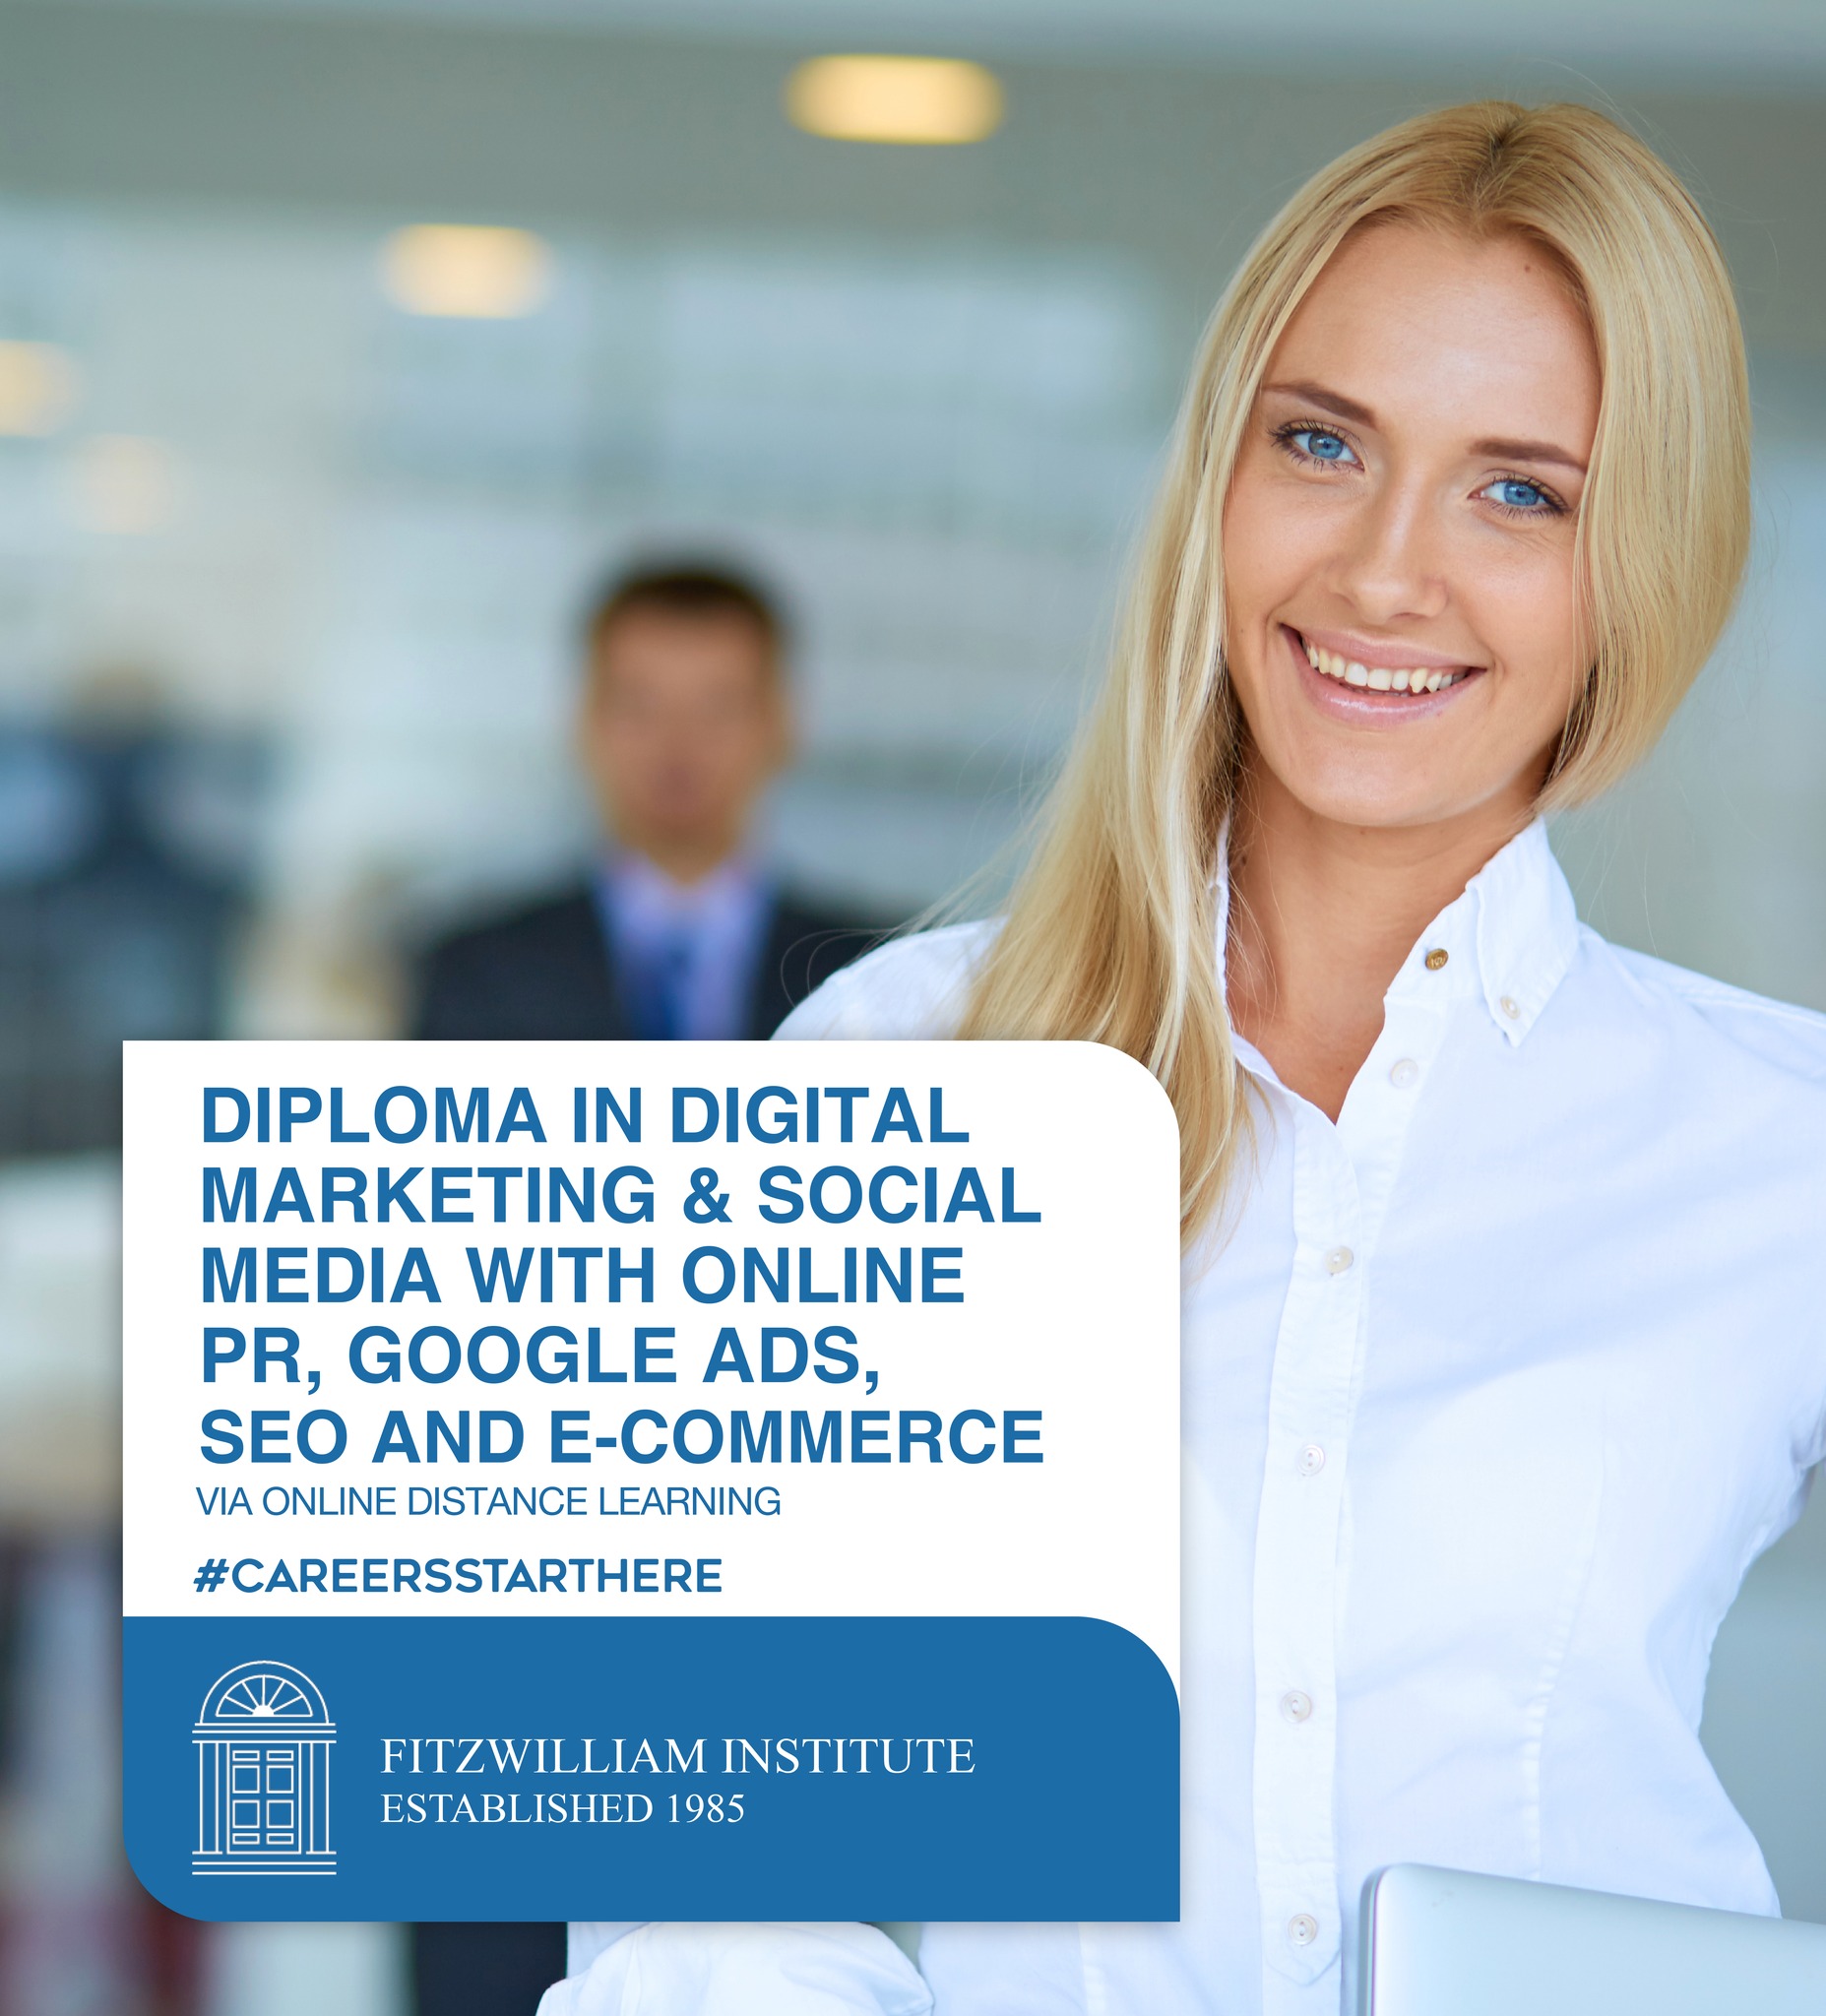 DIPLOMA-IN-DIGITAL-MARKETING-SOCIAL-MEDIA-WITH-ONLINE-PR-GOOGLE-ADS-SEO-AND-E-COMMERCE-VIA-ONLINE-DISTANCE-LEARNING.jpg